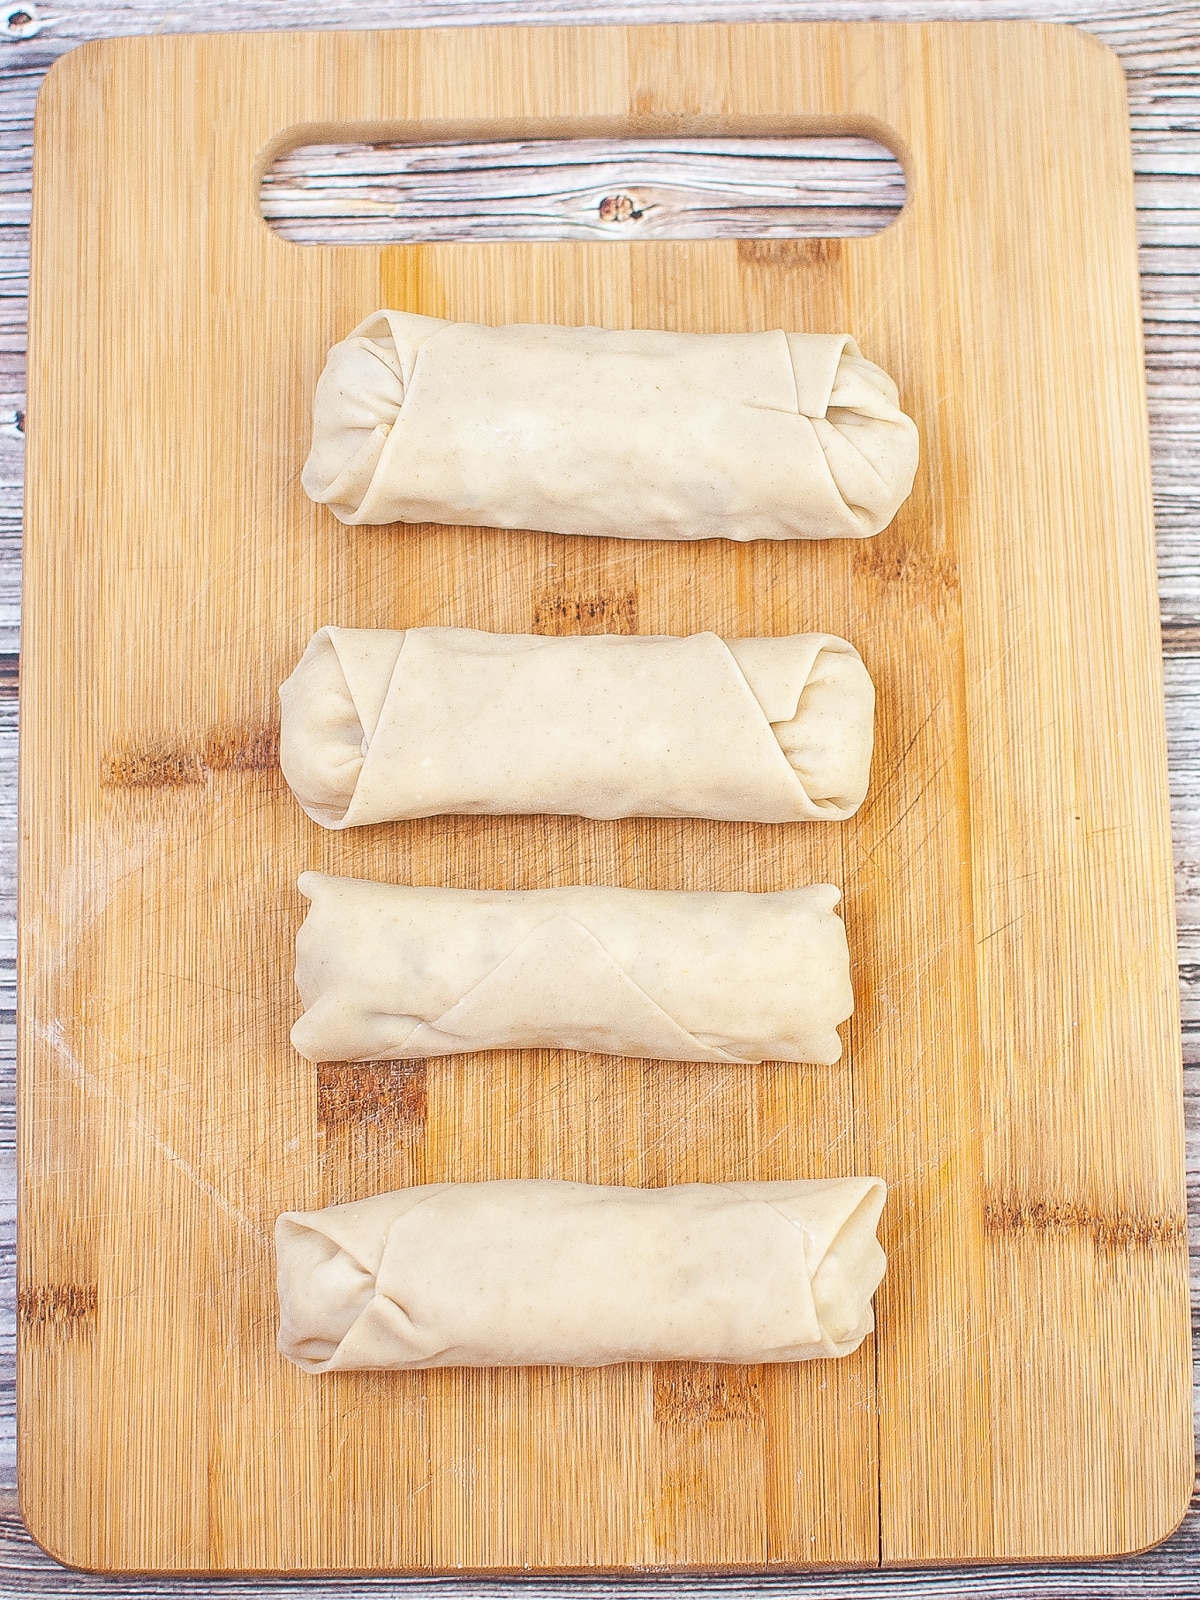 Four uncooked eggrolls on a wooden cutting board.